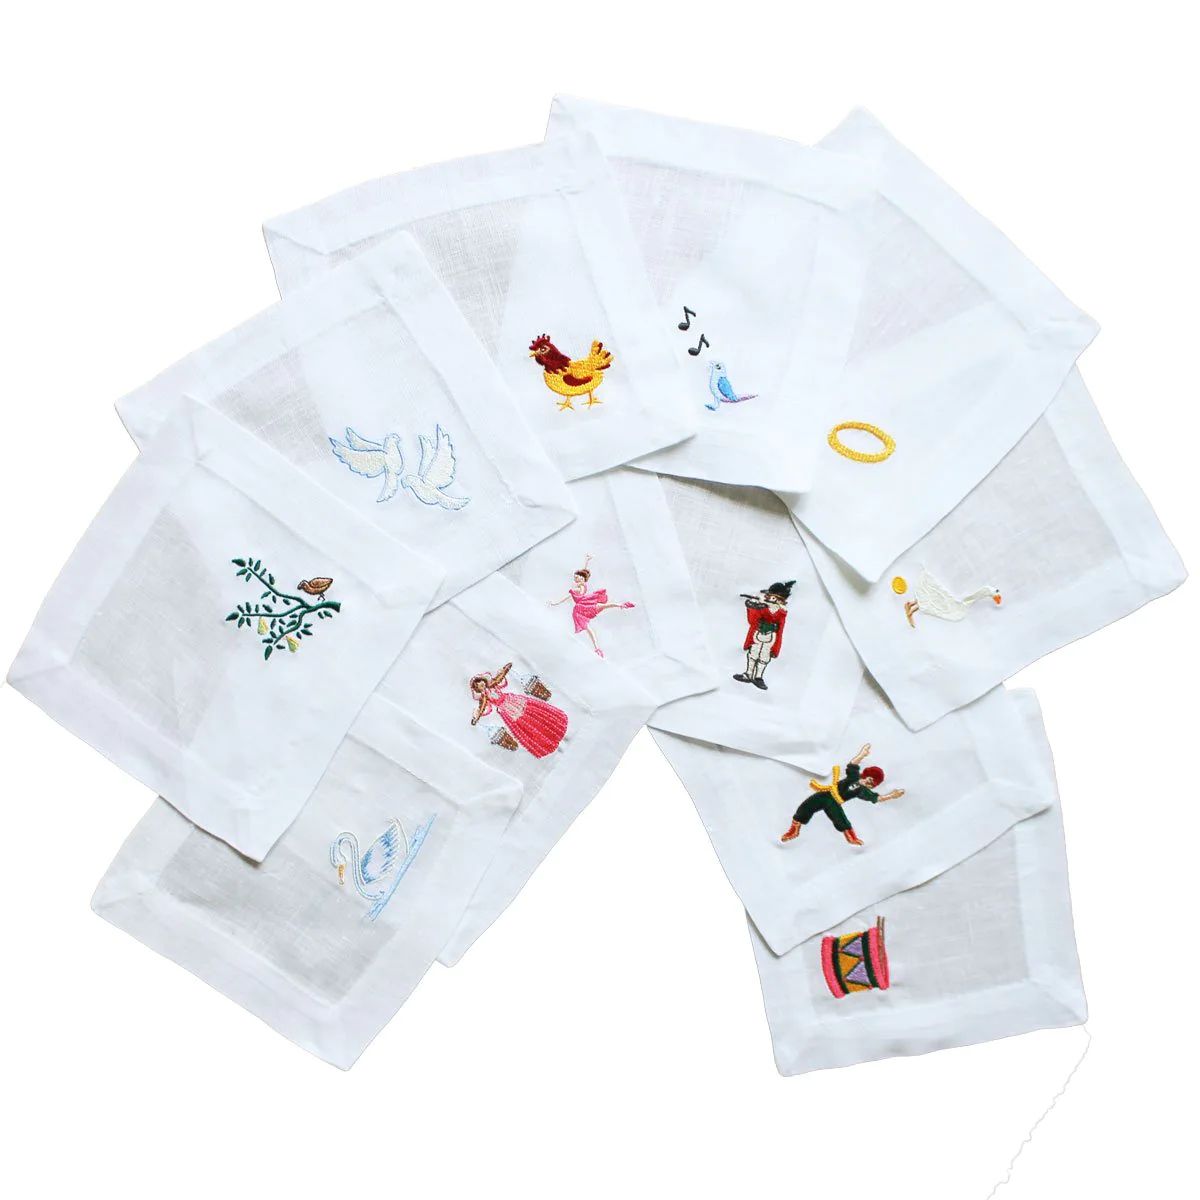 The "Twelve Days of Christmas" Embroidered Cocktail Napkins | Set of 12 | Christian Ladd Home